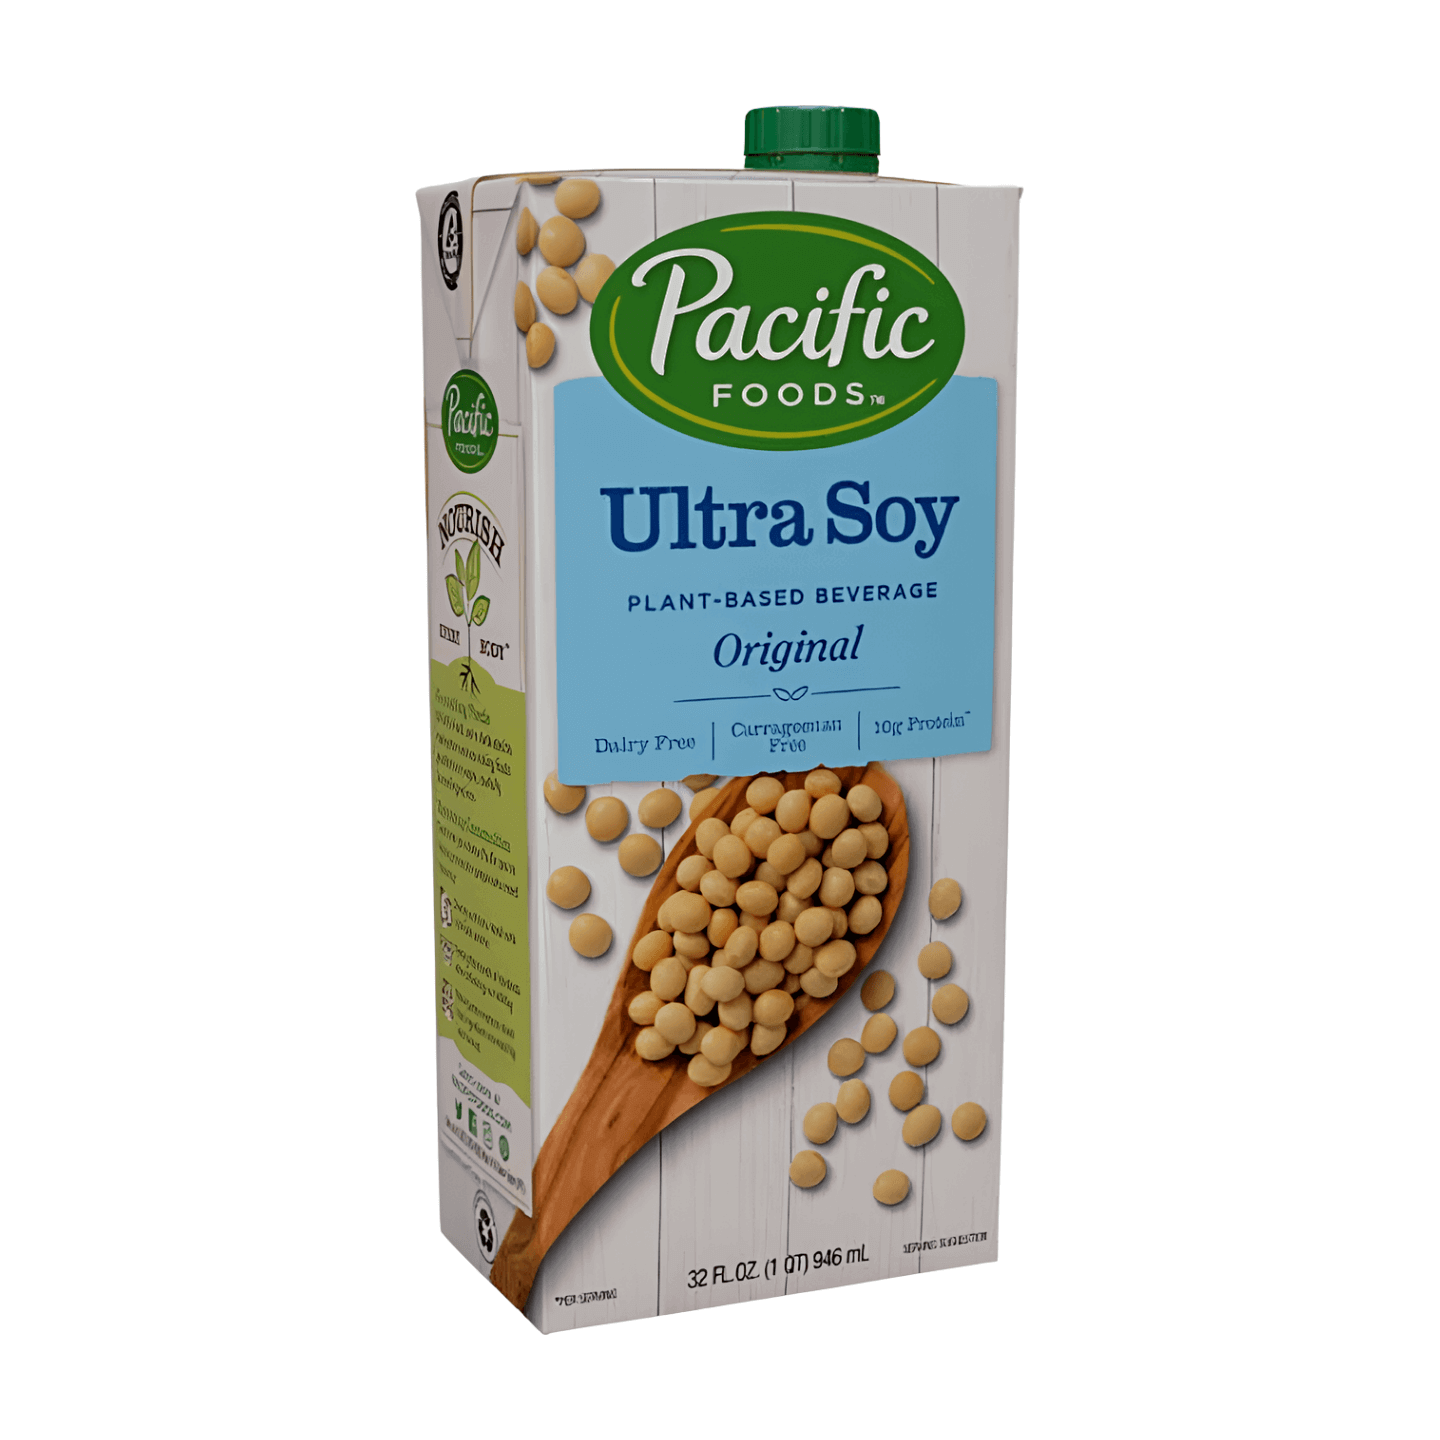 Pacific Foods Ultra Soy Original Plant Based Beverage